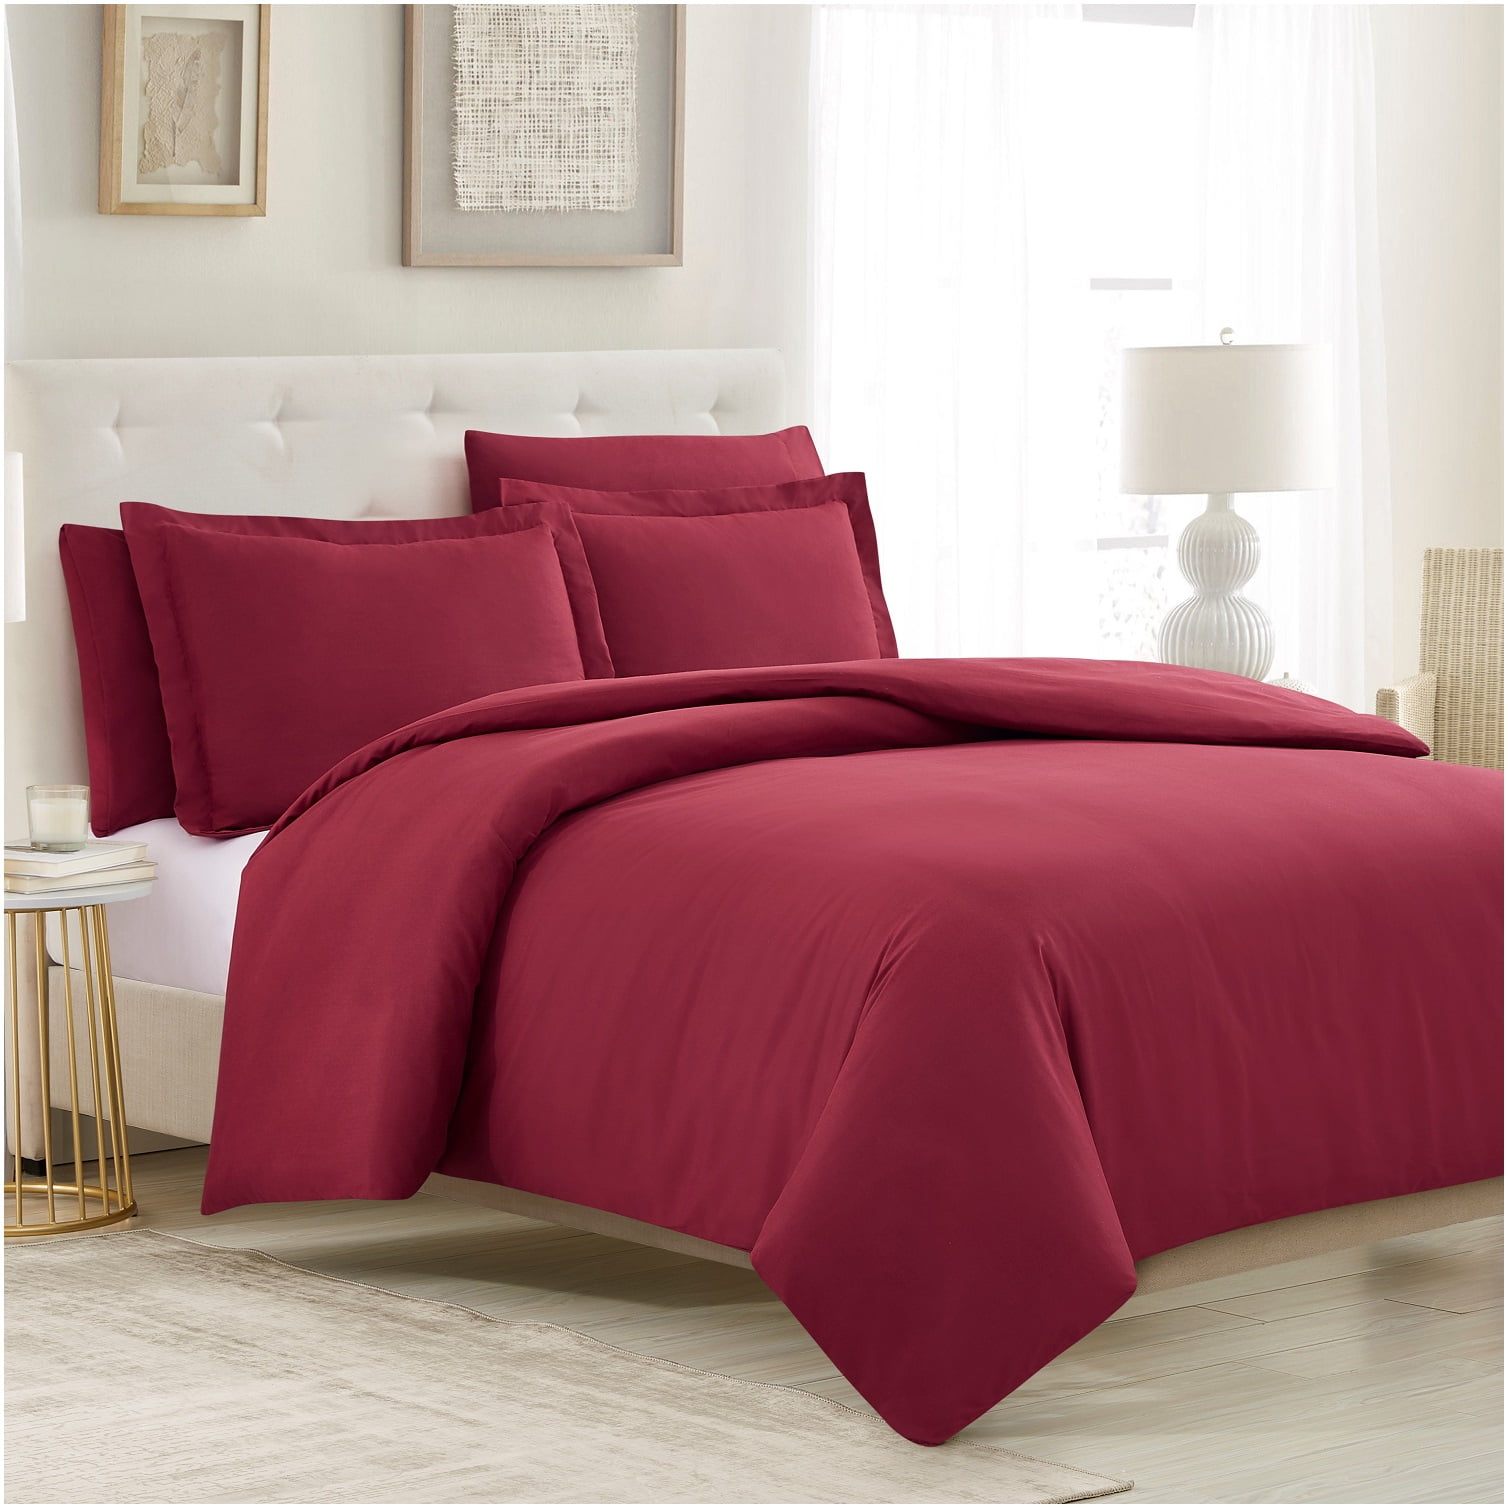 Duvet Cover Queen Queen Grey. 90 90 Ultra Soft Double Brushed Microfiber Hotel Bedding Collection with Zipper Closure and Corner Ties and 2 Pillow Shams